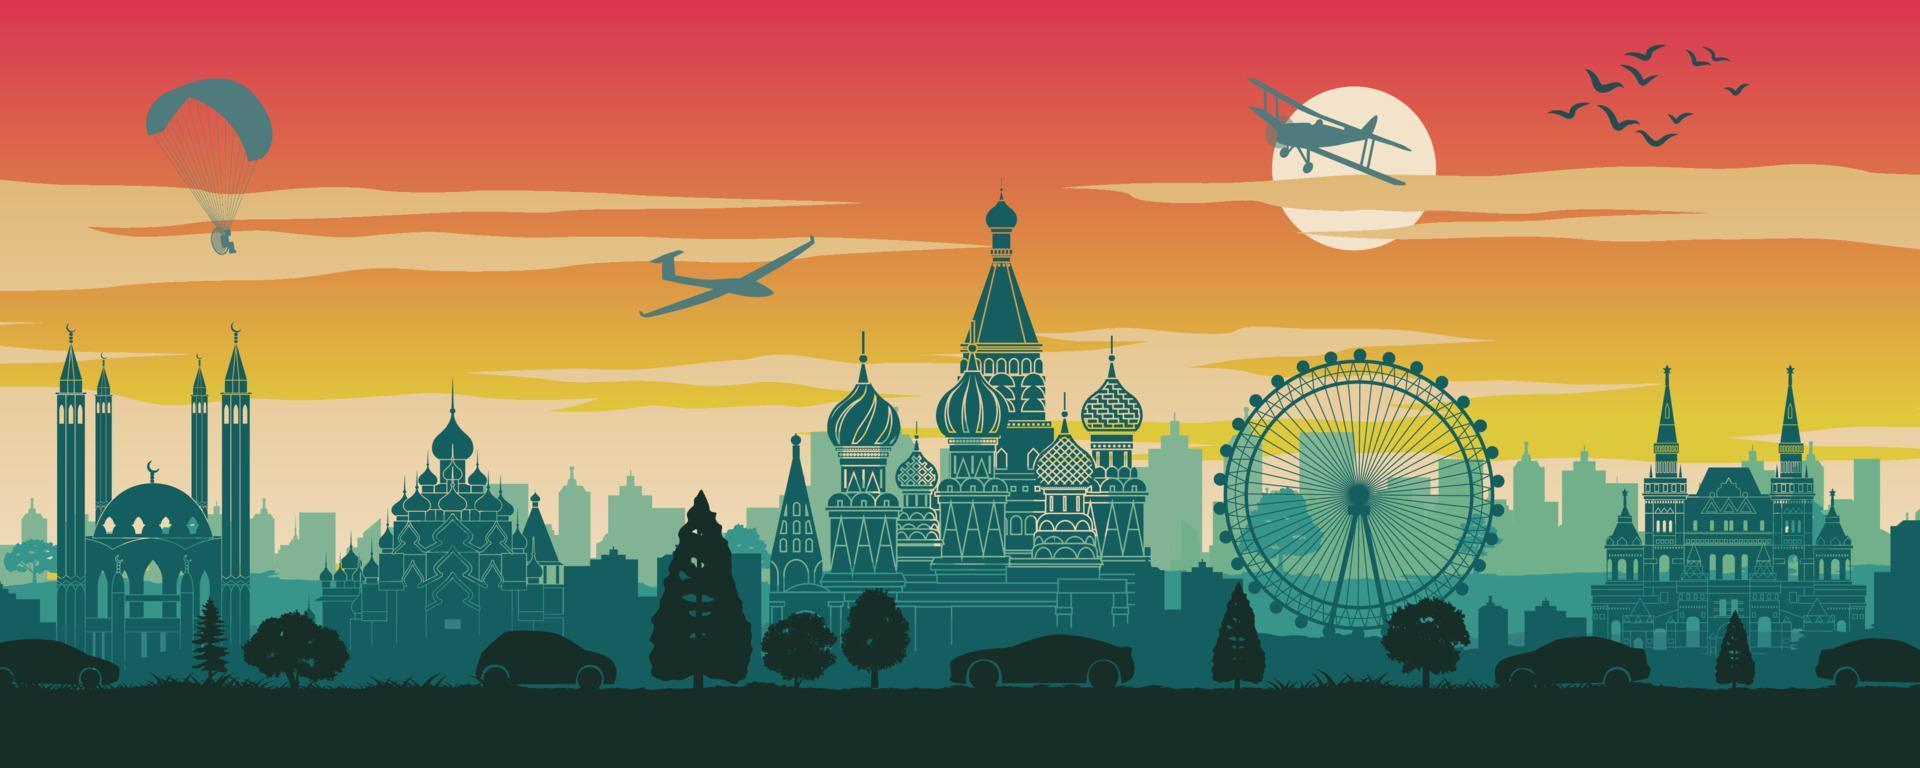 Russia famous landmark in scenery design,travel destination,silhouette design, sunset time in red and green color vector